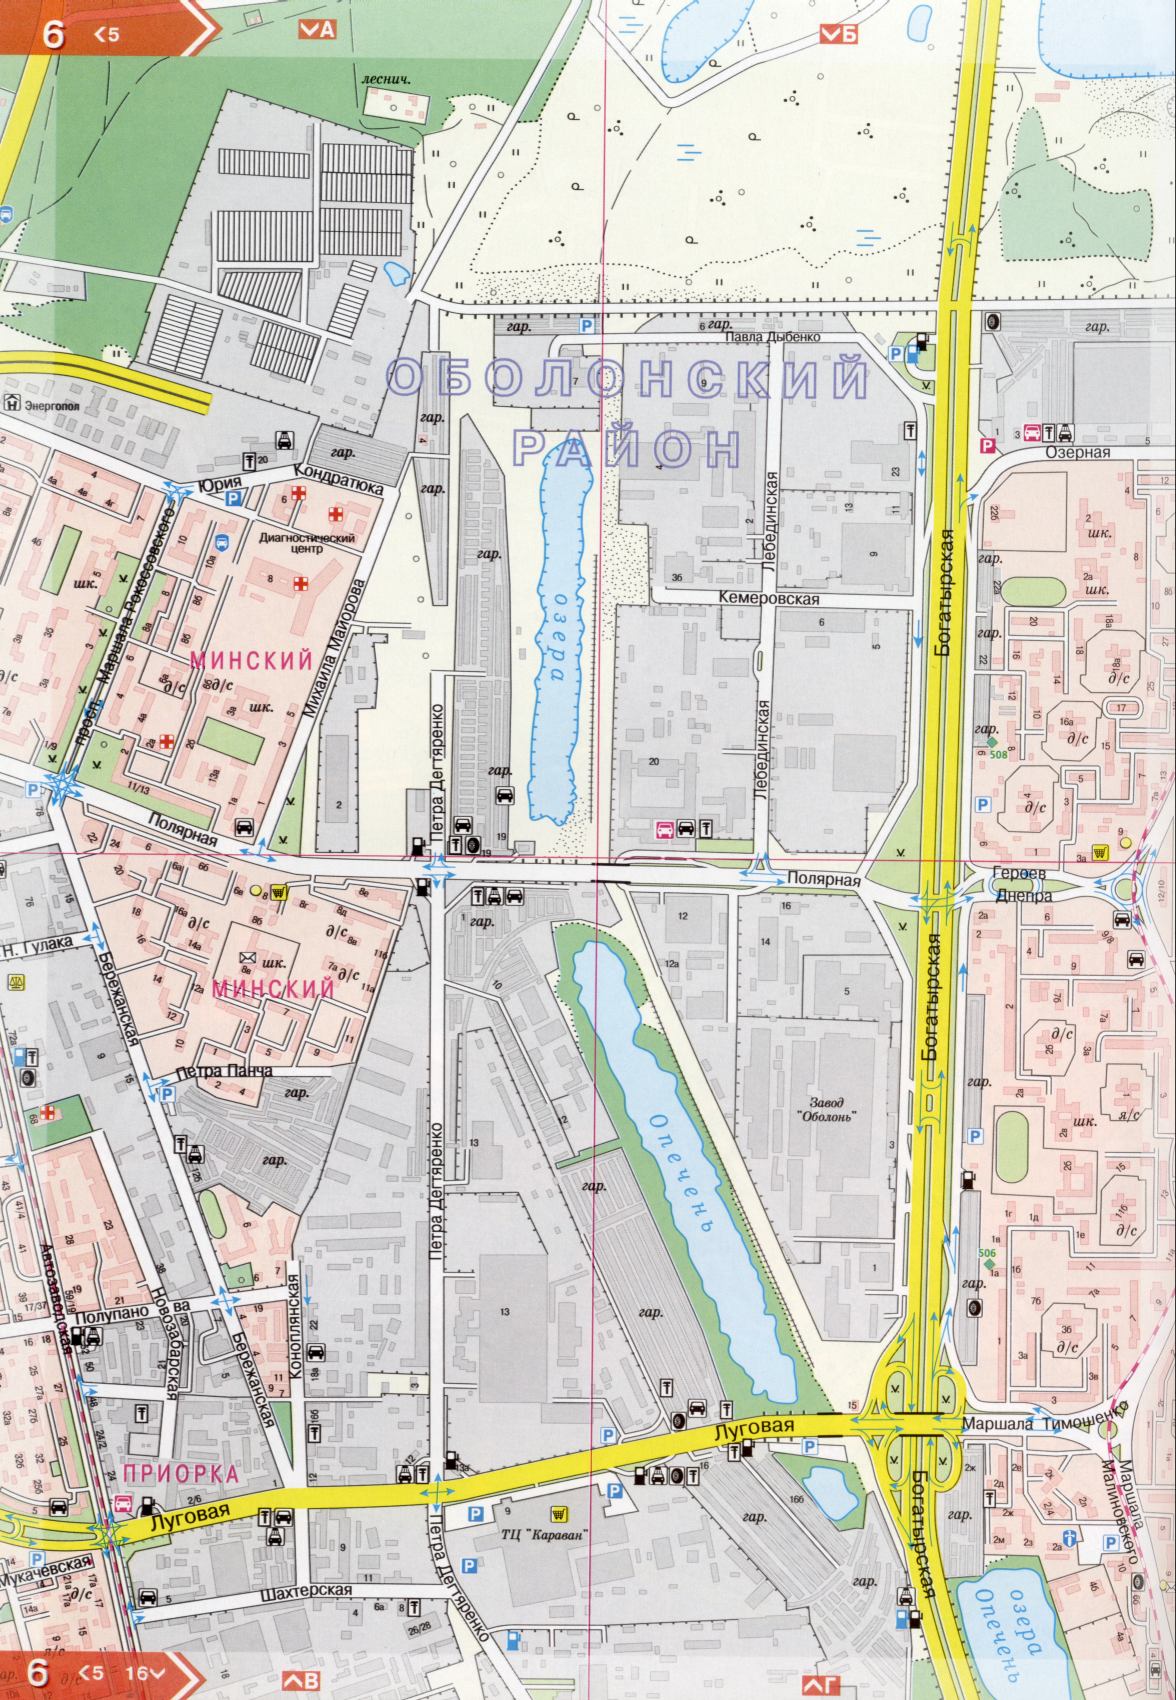 The map of Kiev is detailed in 1cm = 150m on 45 sheets. Map of Kiev from the atlas of highways. Download for detailed map, D0 - Bogatyrskaya street, Kiev